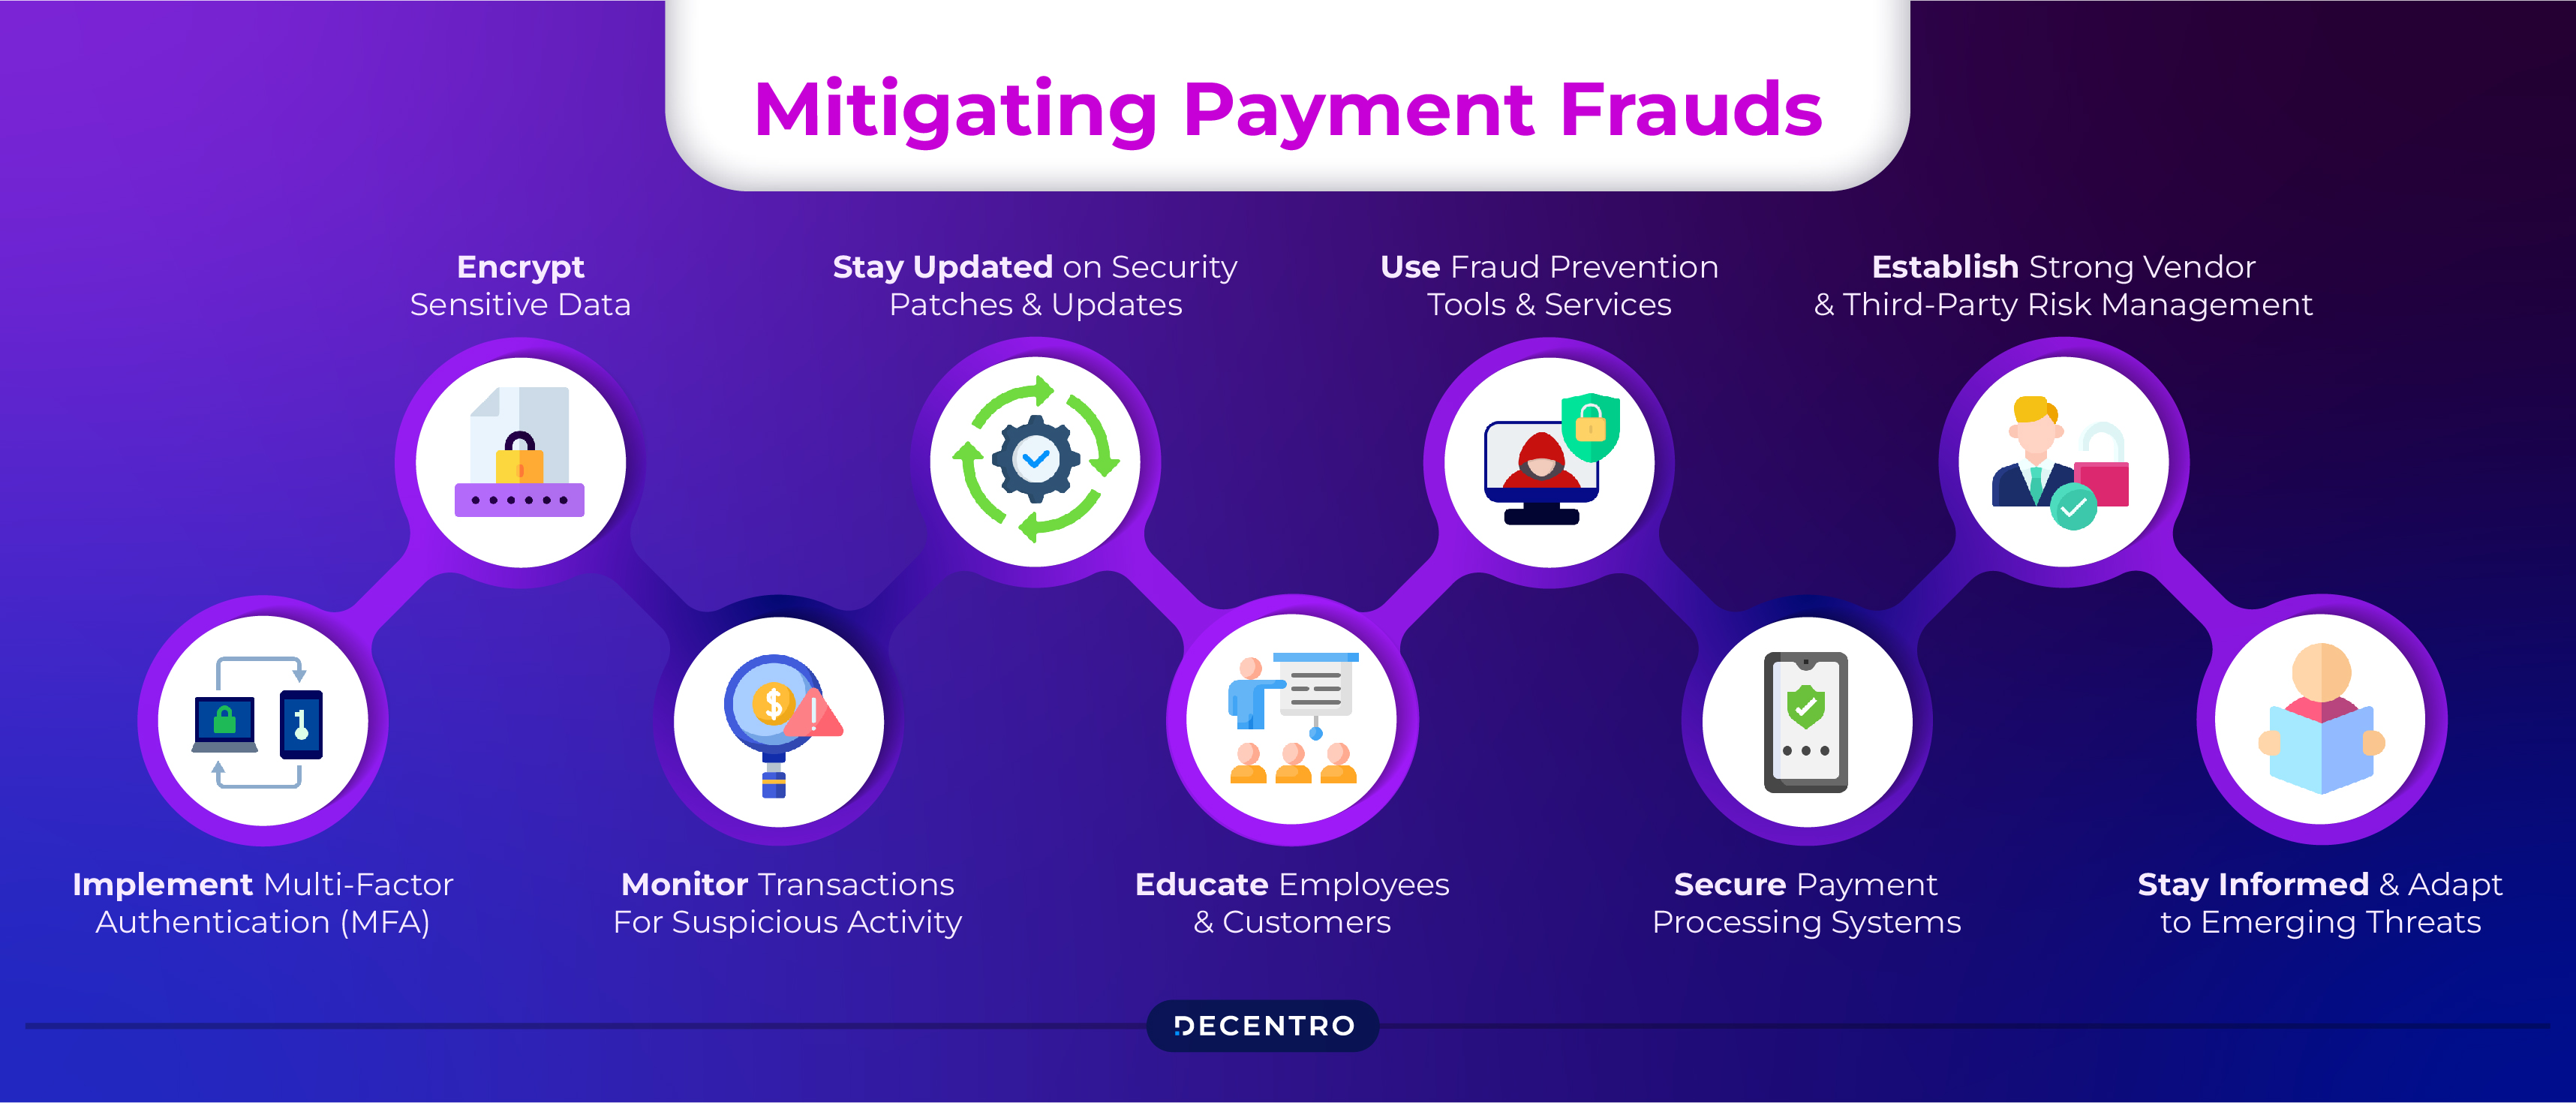 Mitigating Payment Frauds 